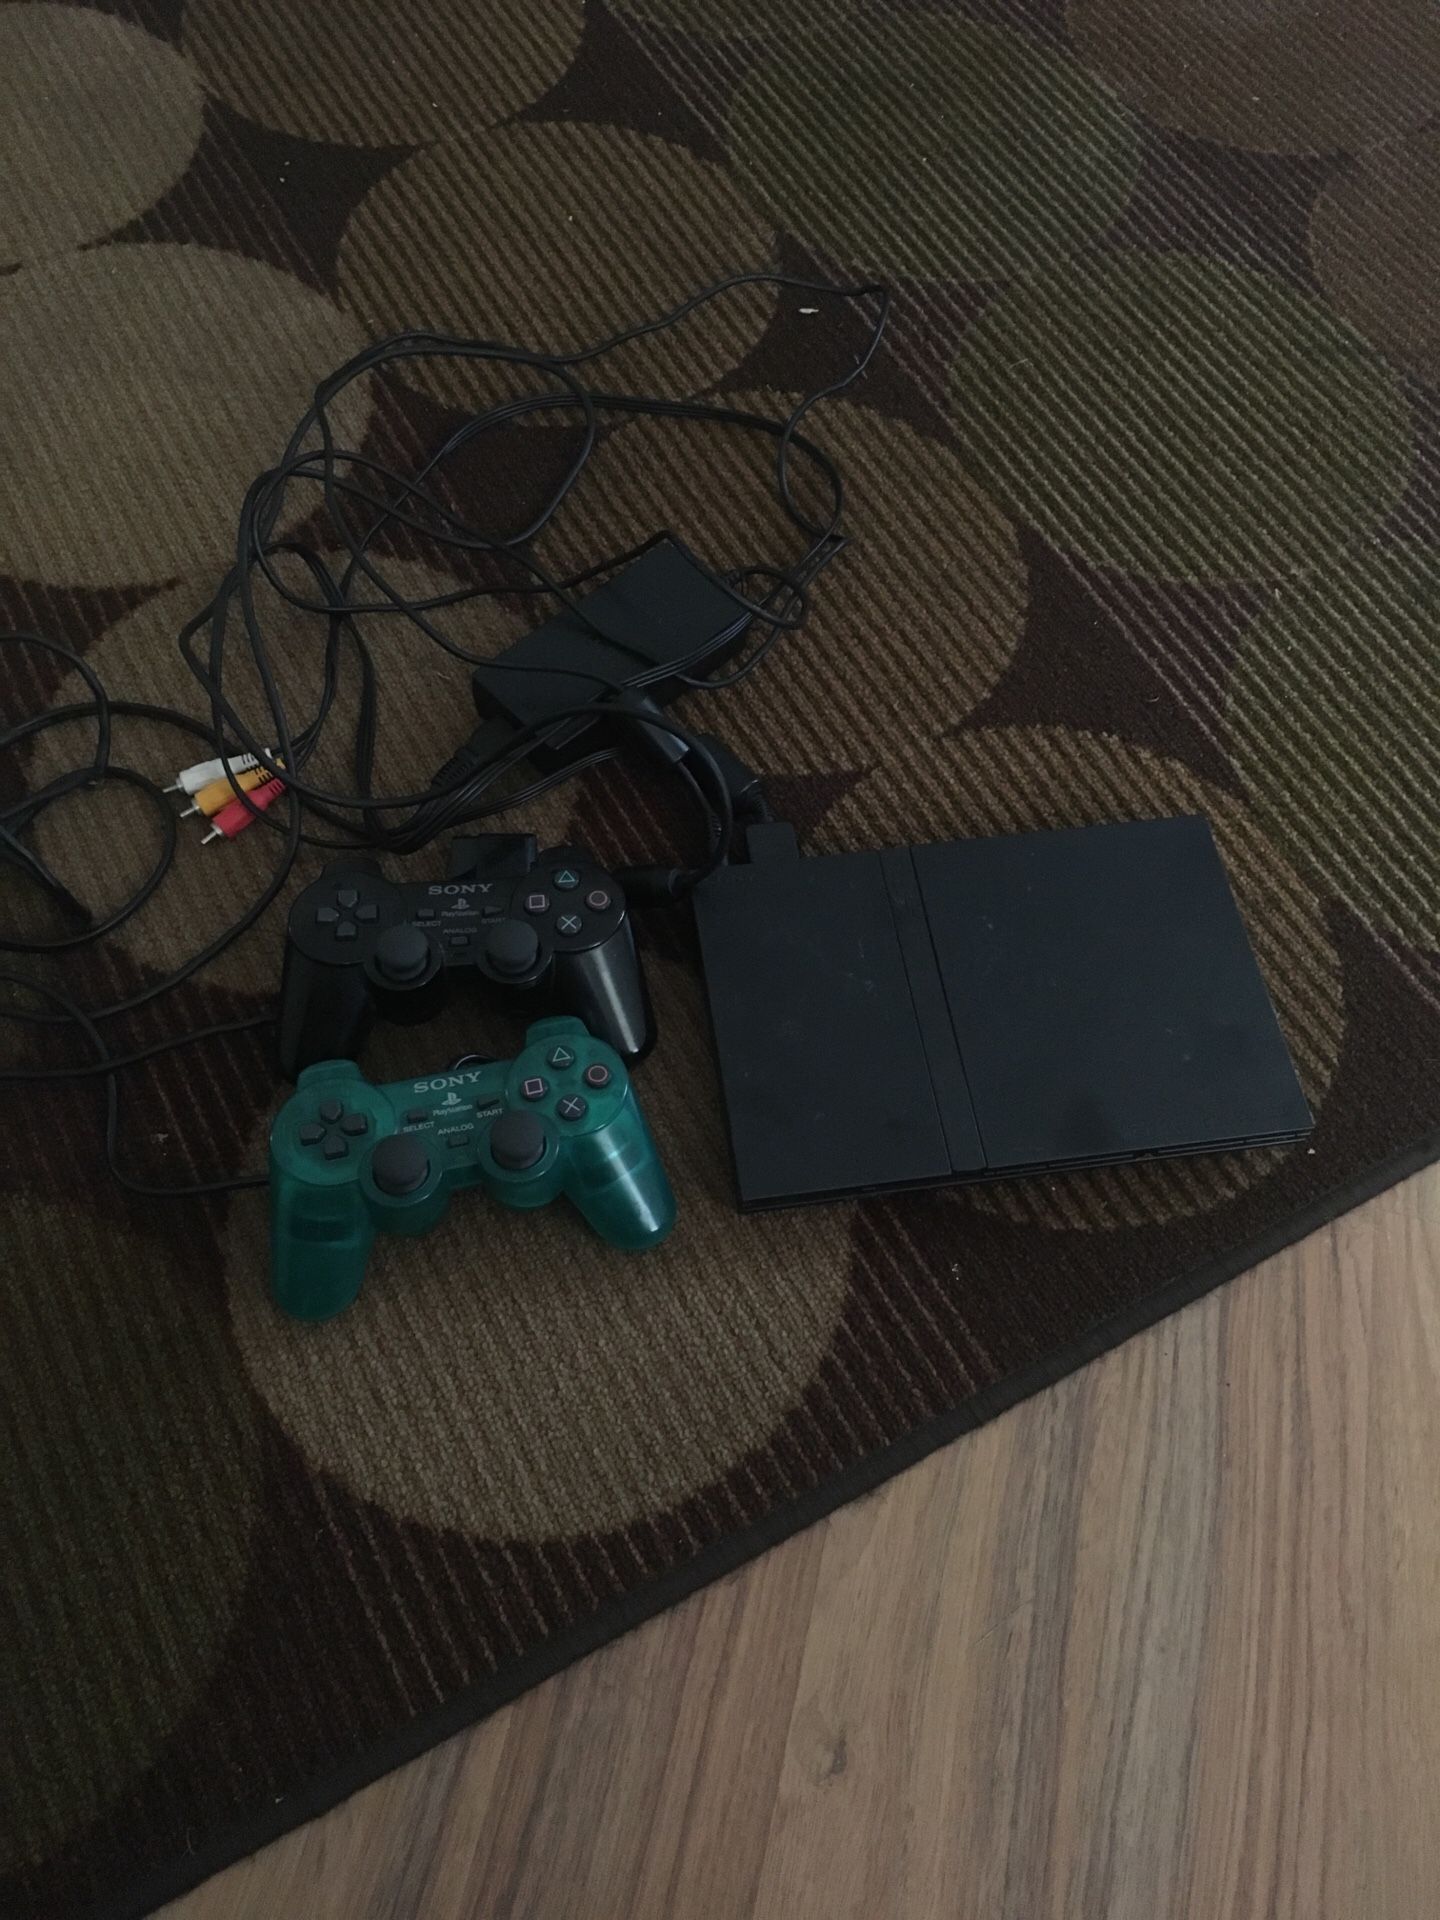 Sony ps2 with two remotes